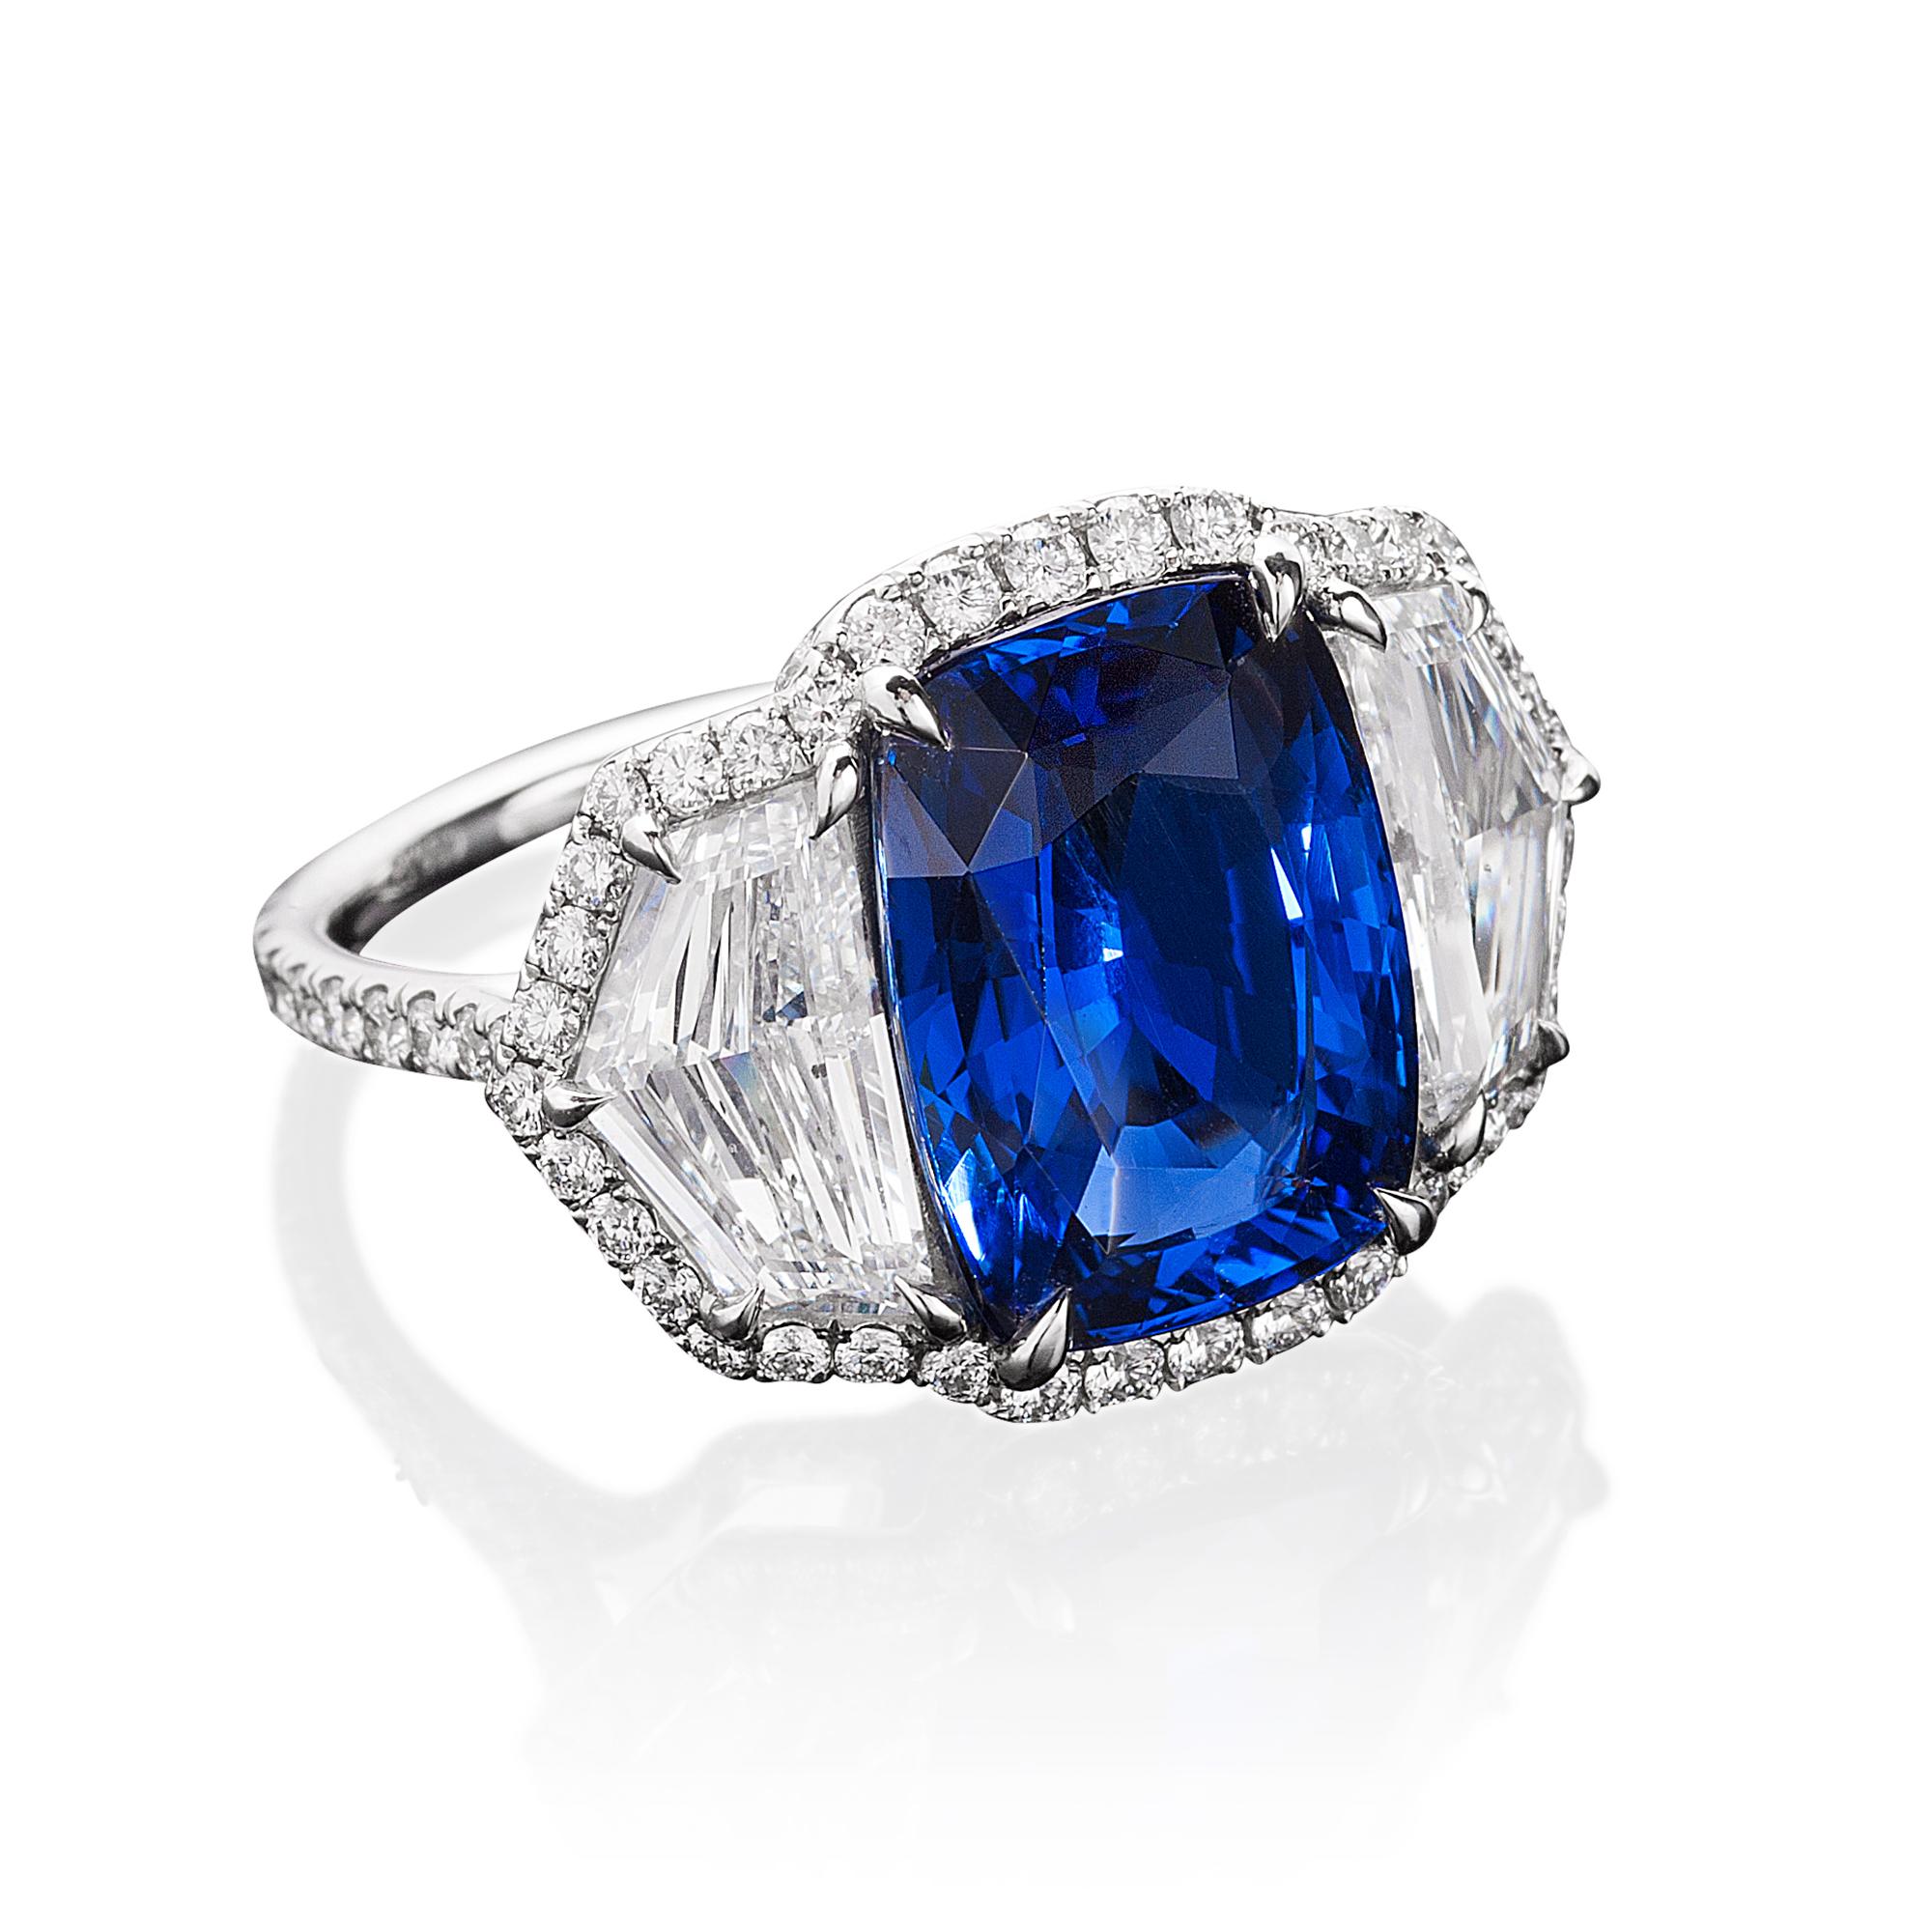 A platinum ring centered upon a rare 7.60 carat natural unheated cushion Burma sapphire, certified by GIA and C.Dunaigre, flanked by epaulet diamonds all set within a delicate diamond micropavé surround with diamond micropavé on the underwire and